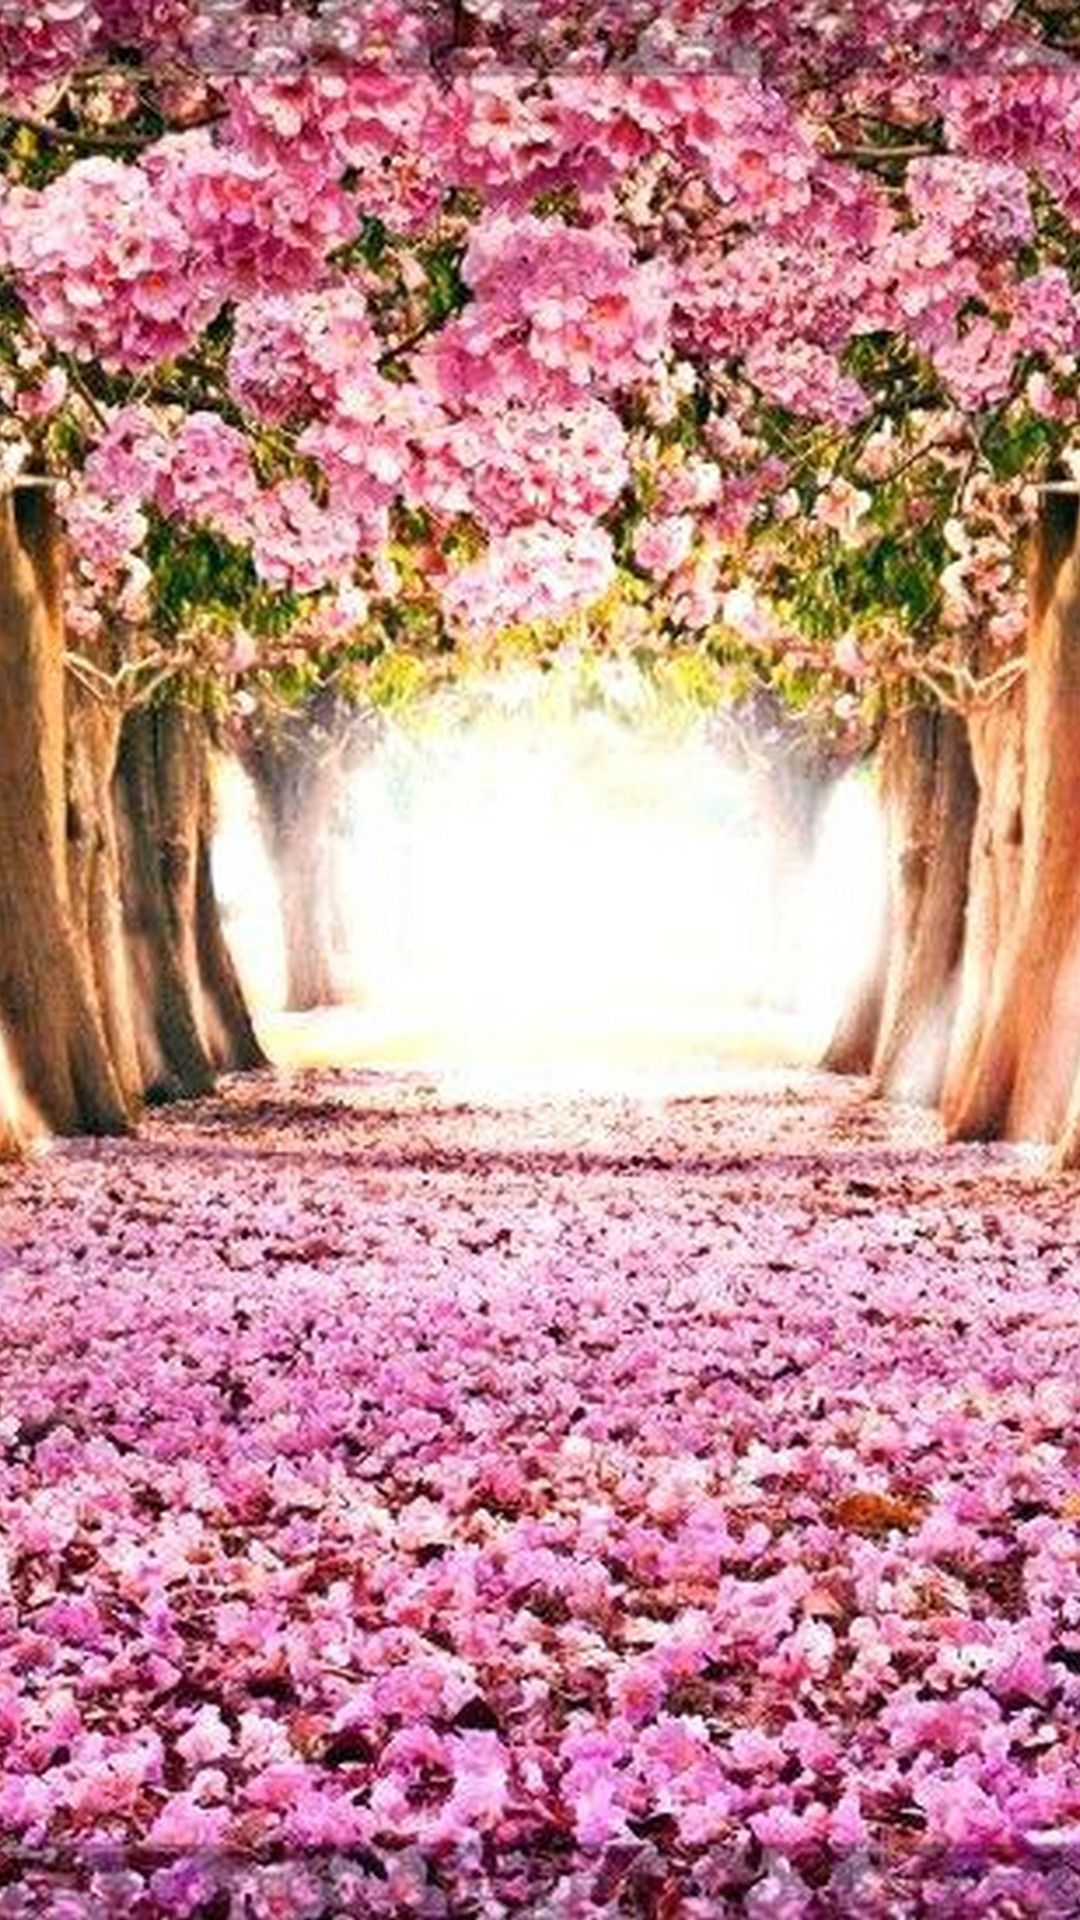 20 Excellent spring wallpaper for ipad You Can Use It Free Of Charge ...